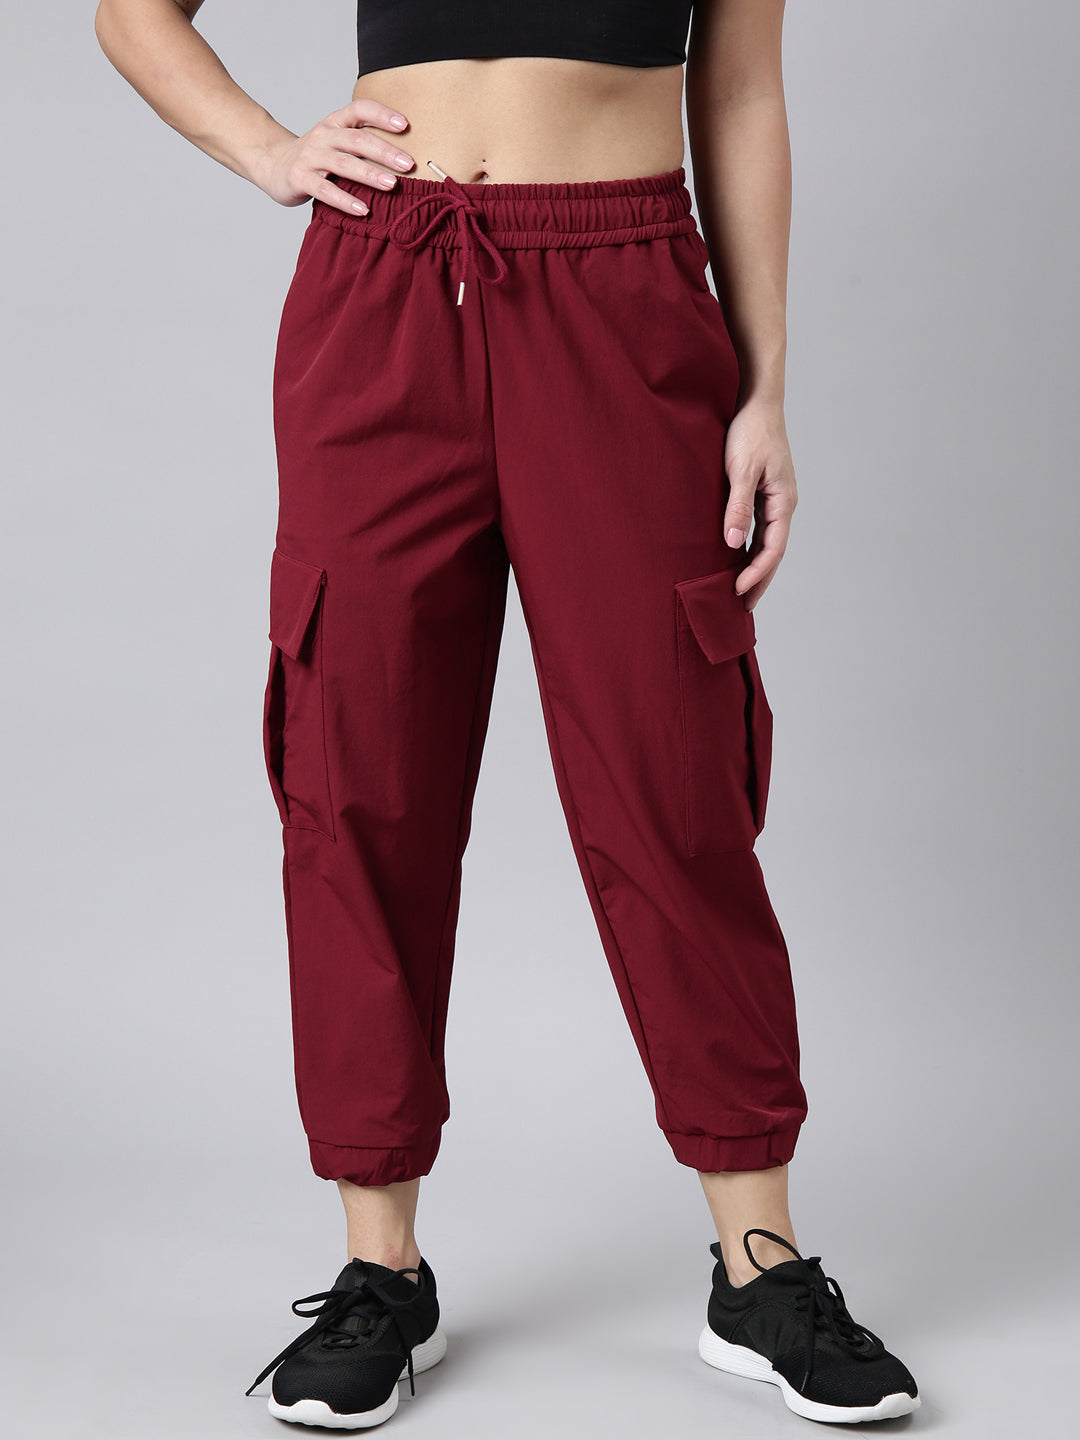 Women Solid Slim Fit Maroon Joggers Track Pant